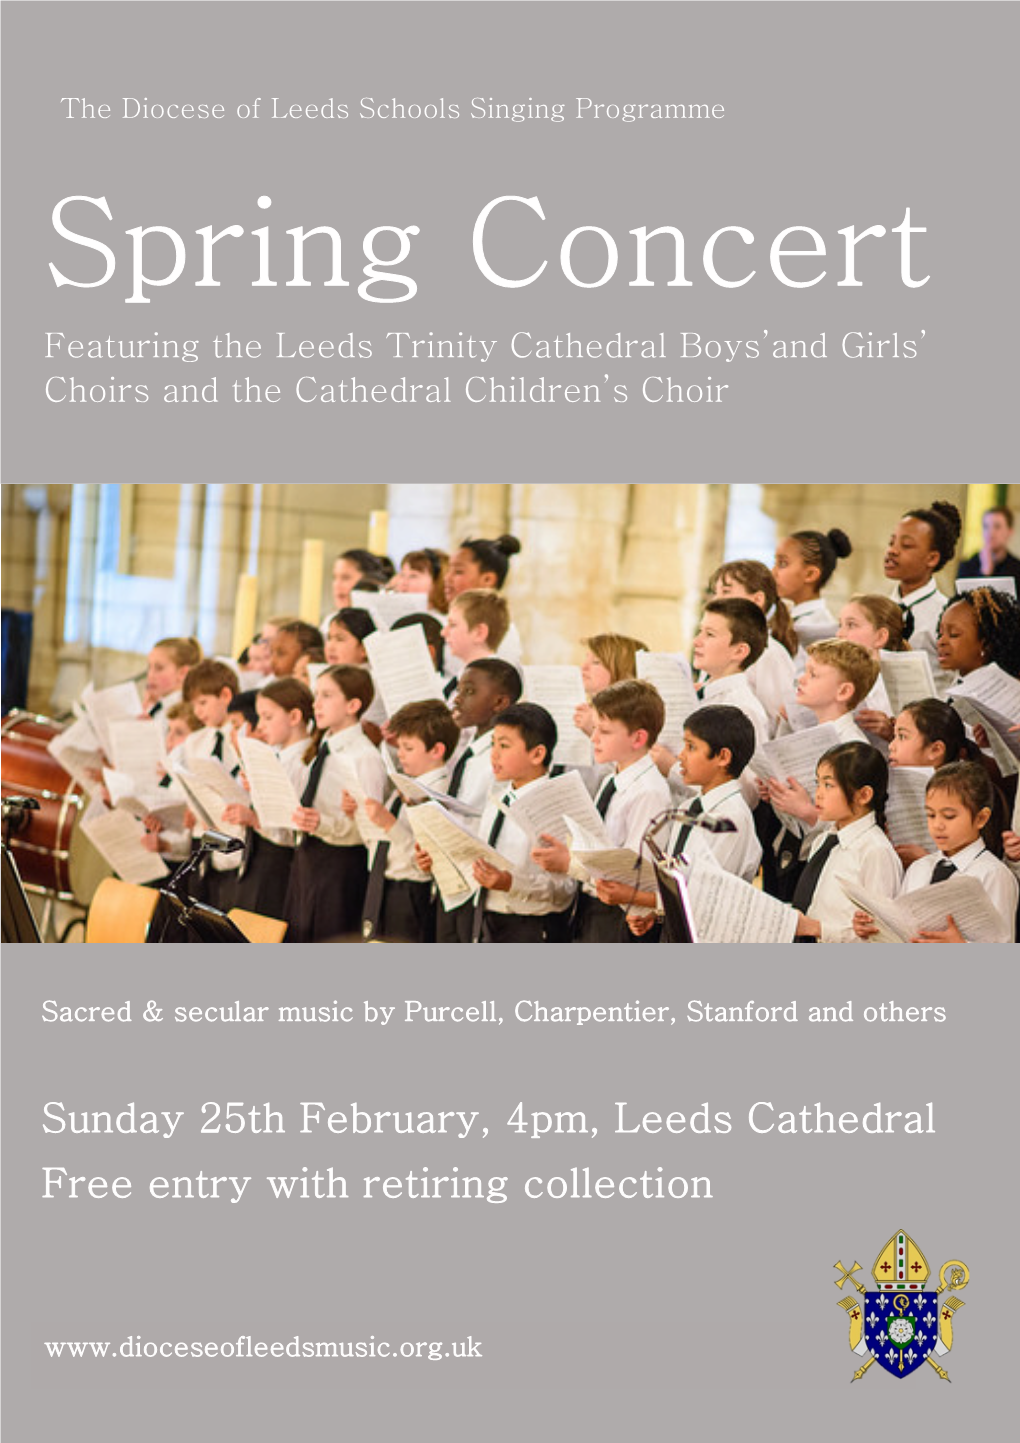 Sunday 25Th February, 4Pm, Leeds Cathedral Free Entry with Retiring Collection